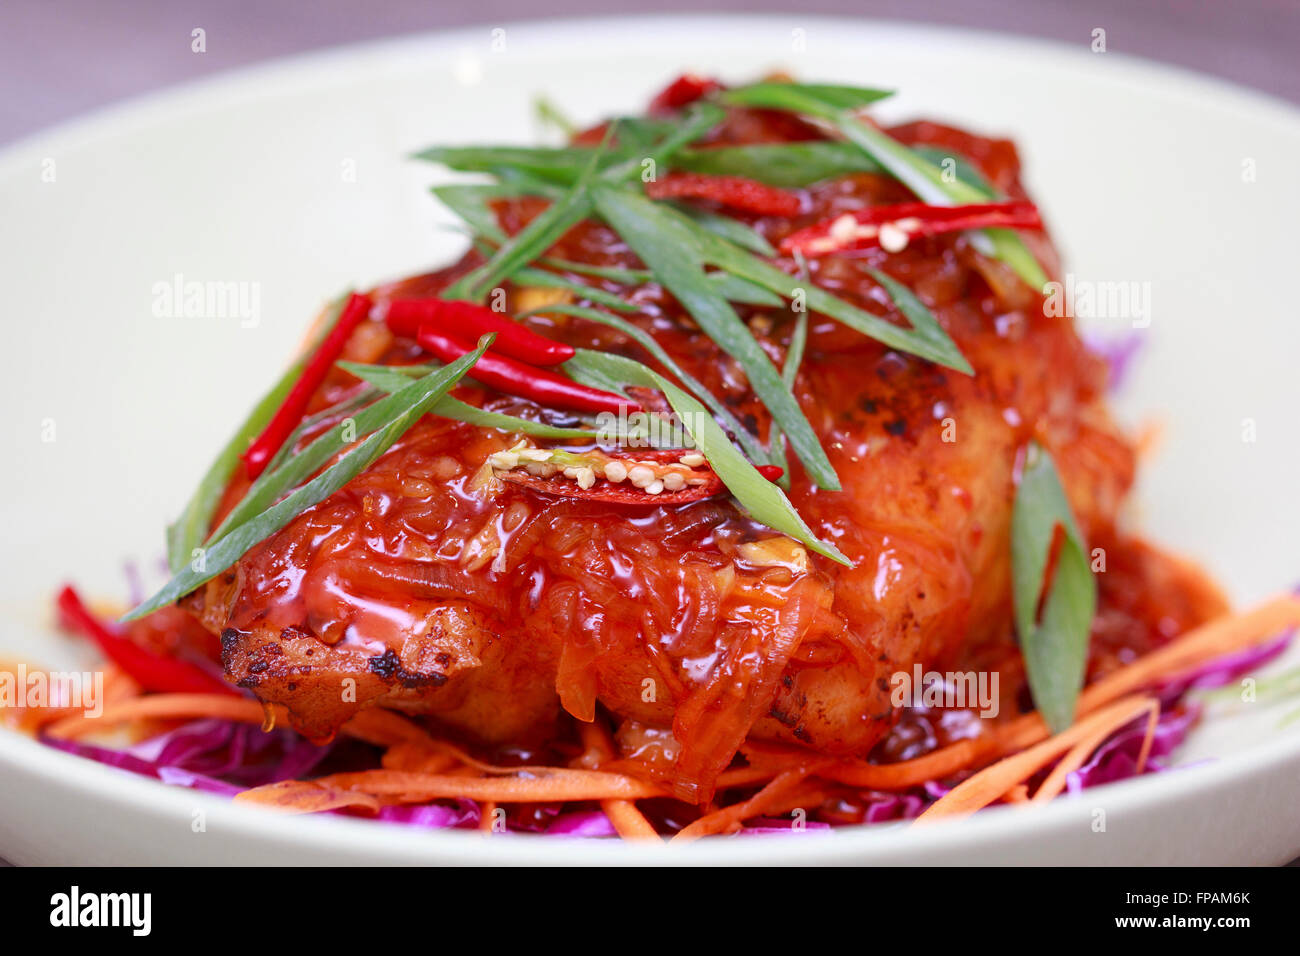 Fried fish with hot chili sauce Stock Photo